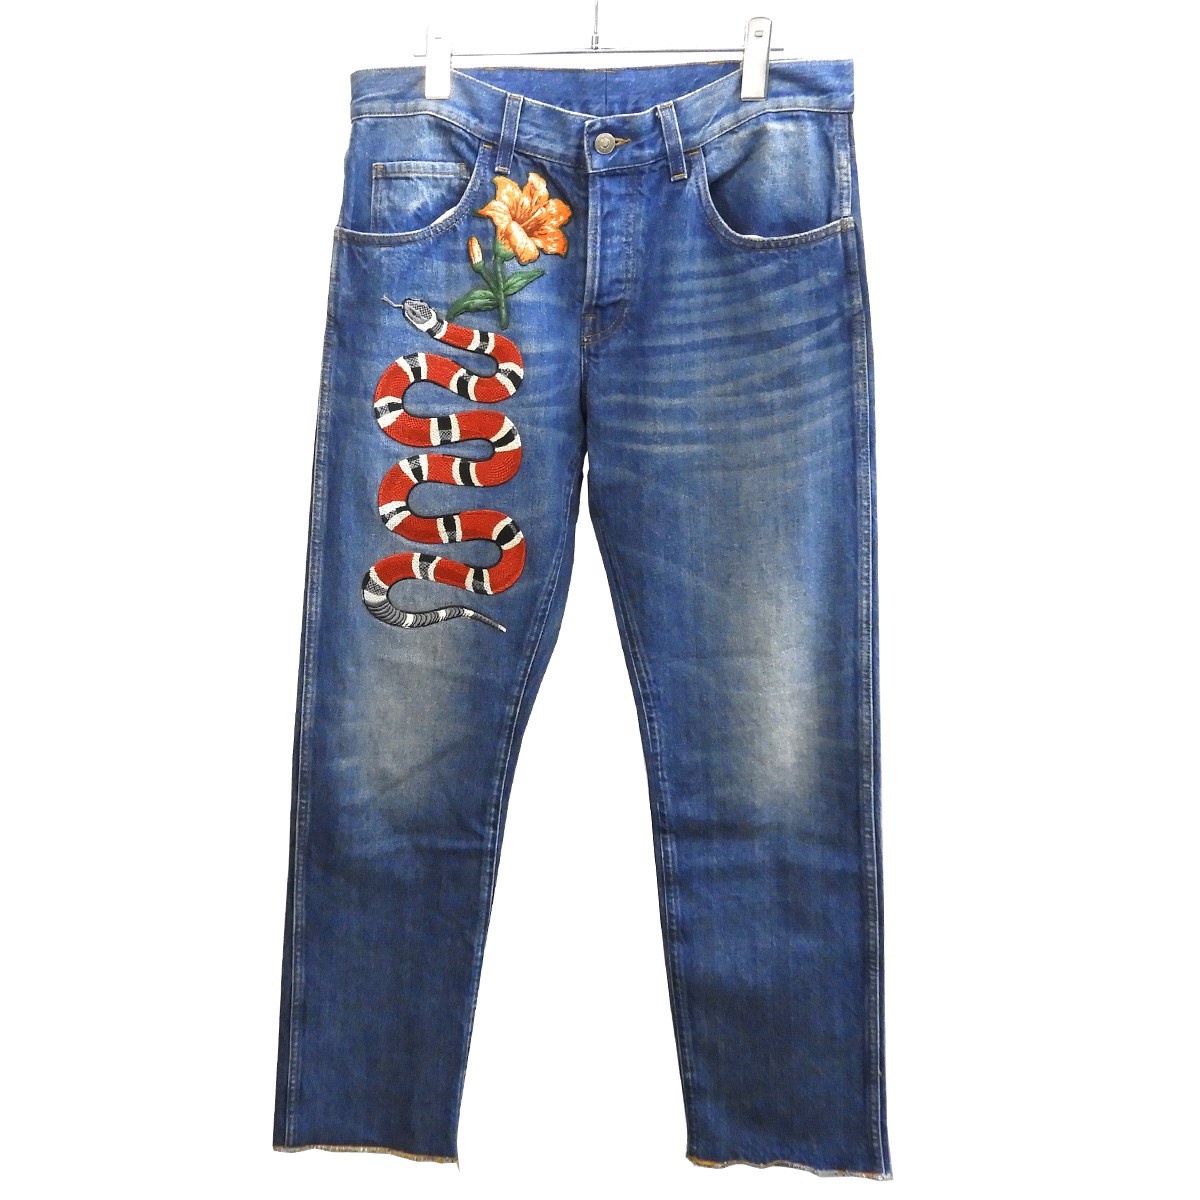 New Ideas For Embroidered Jeans 2020